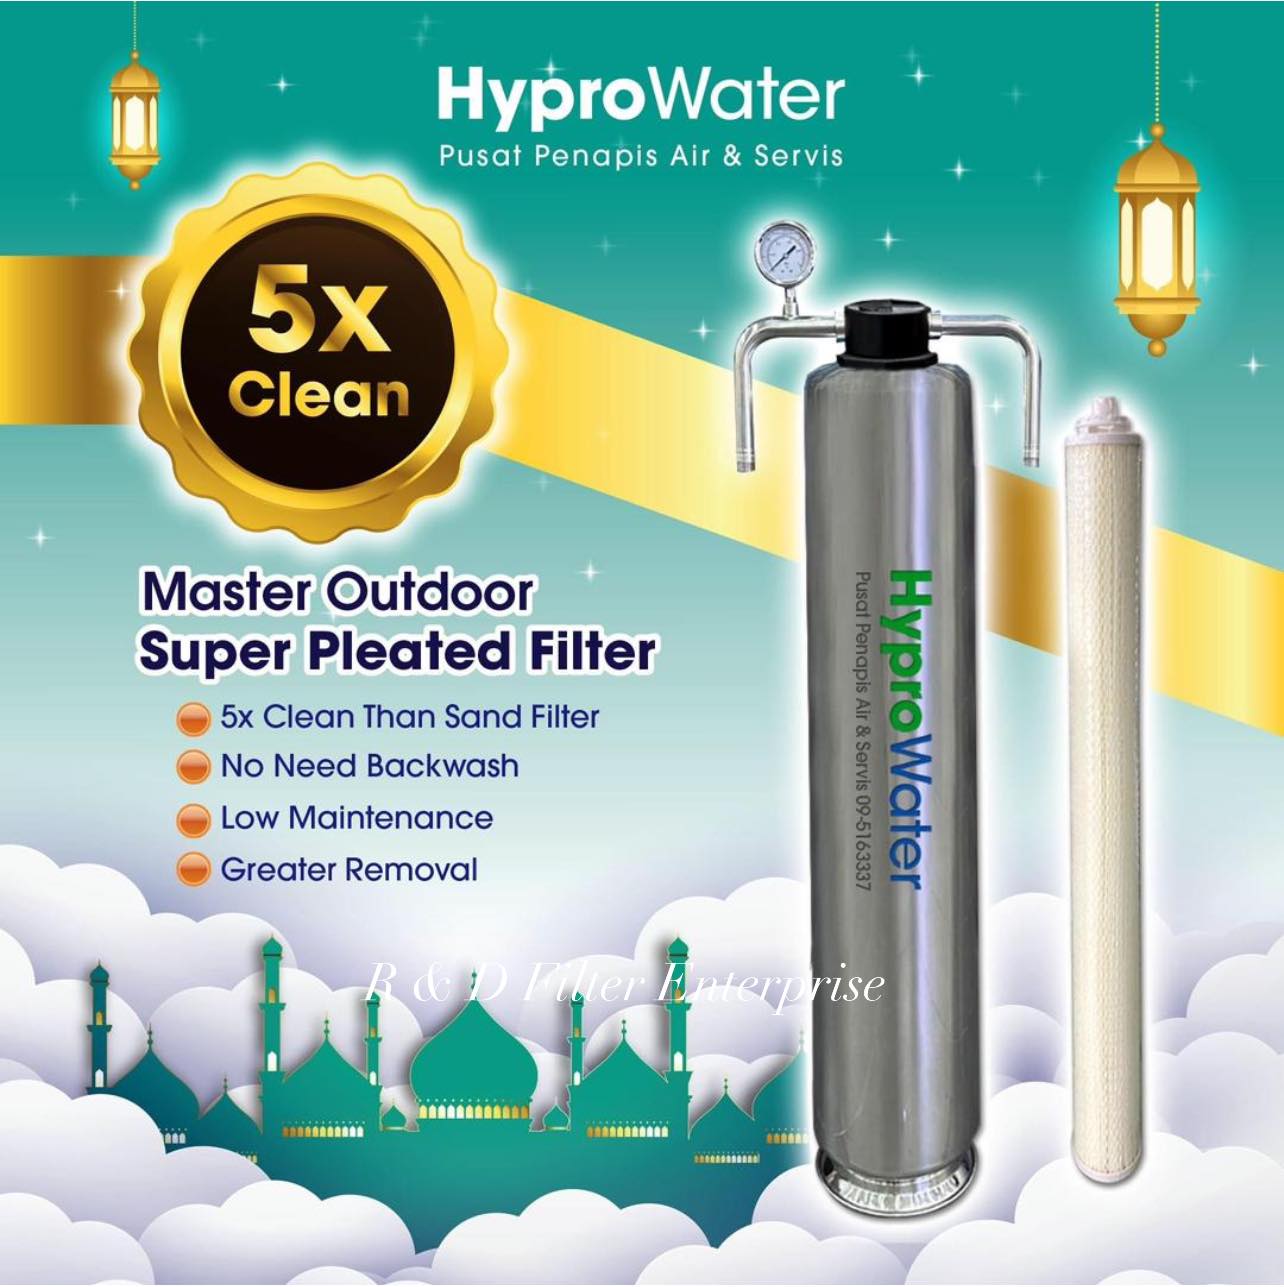 Master outdoor super pleated filter